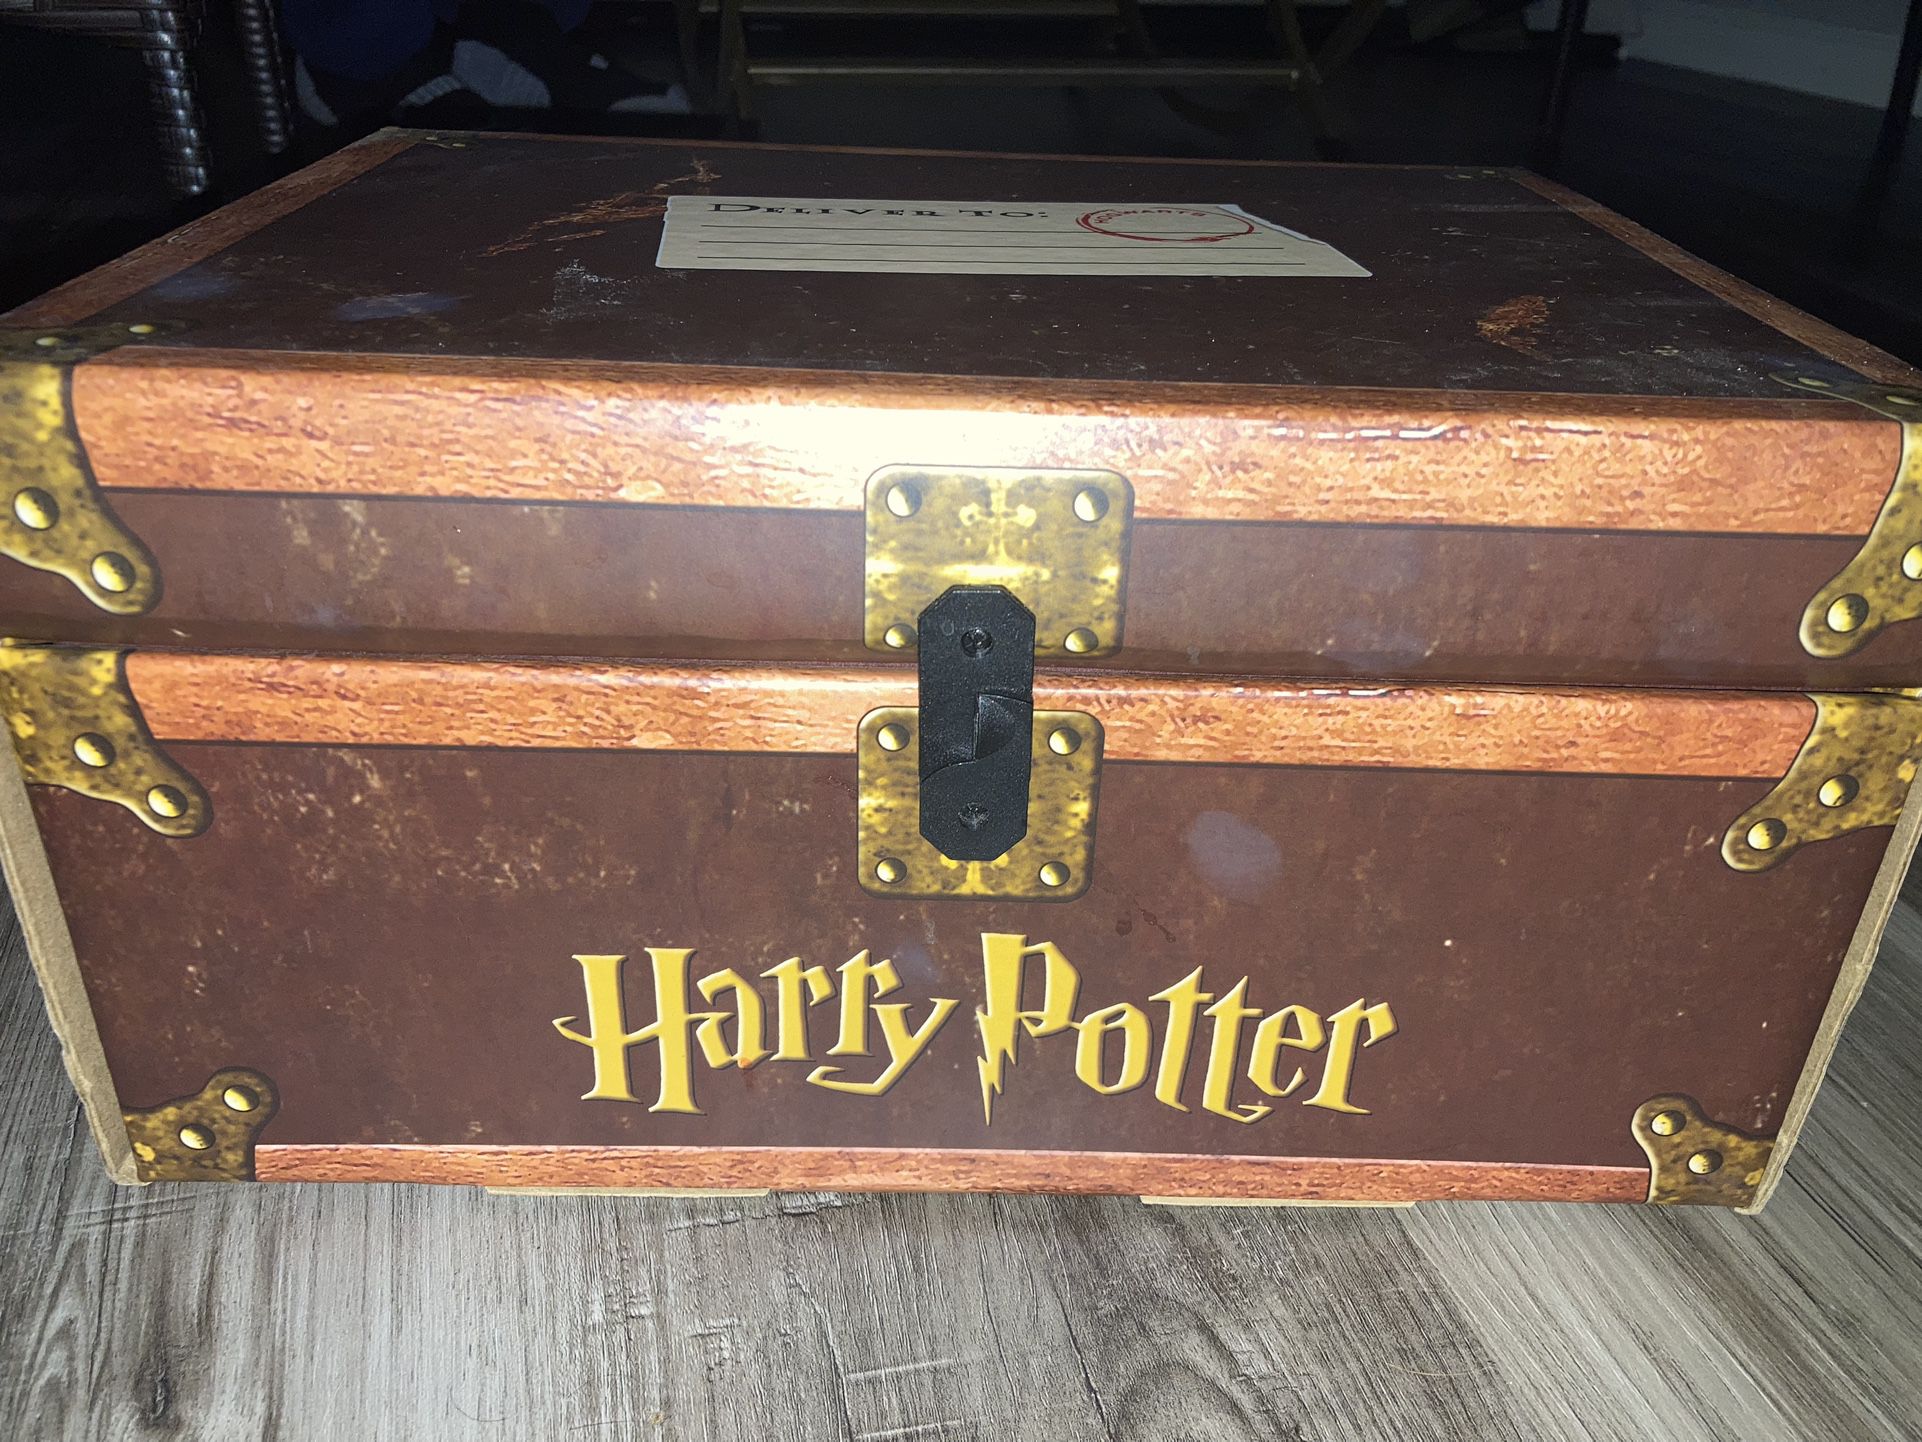 Harry Potter Hardcover edition with chest and stickers